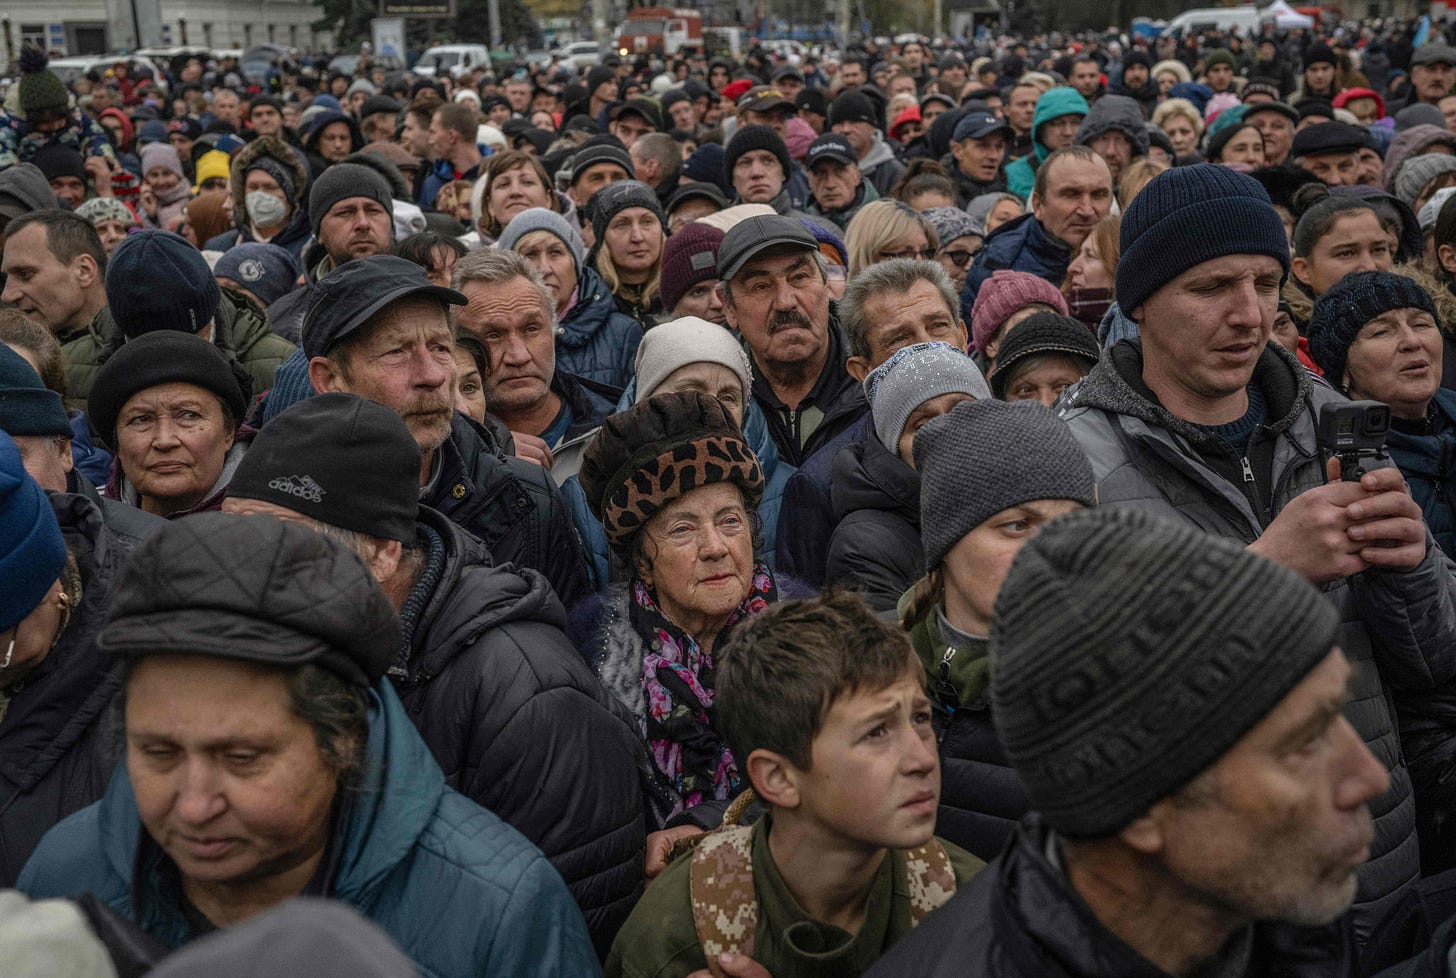 Local residents wait for aid supply distribution in the centre of Kherson on November 18, 2022, amid the Russian invasion of Ukraine. (Photo by Bulent Kilic/AFP via Getty Images)